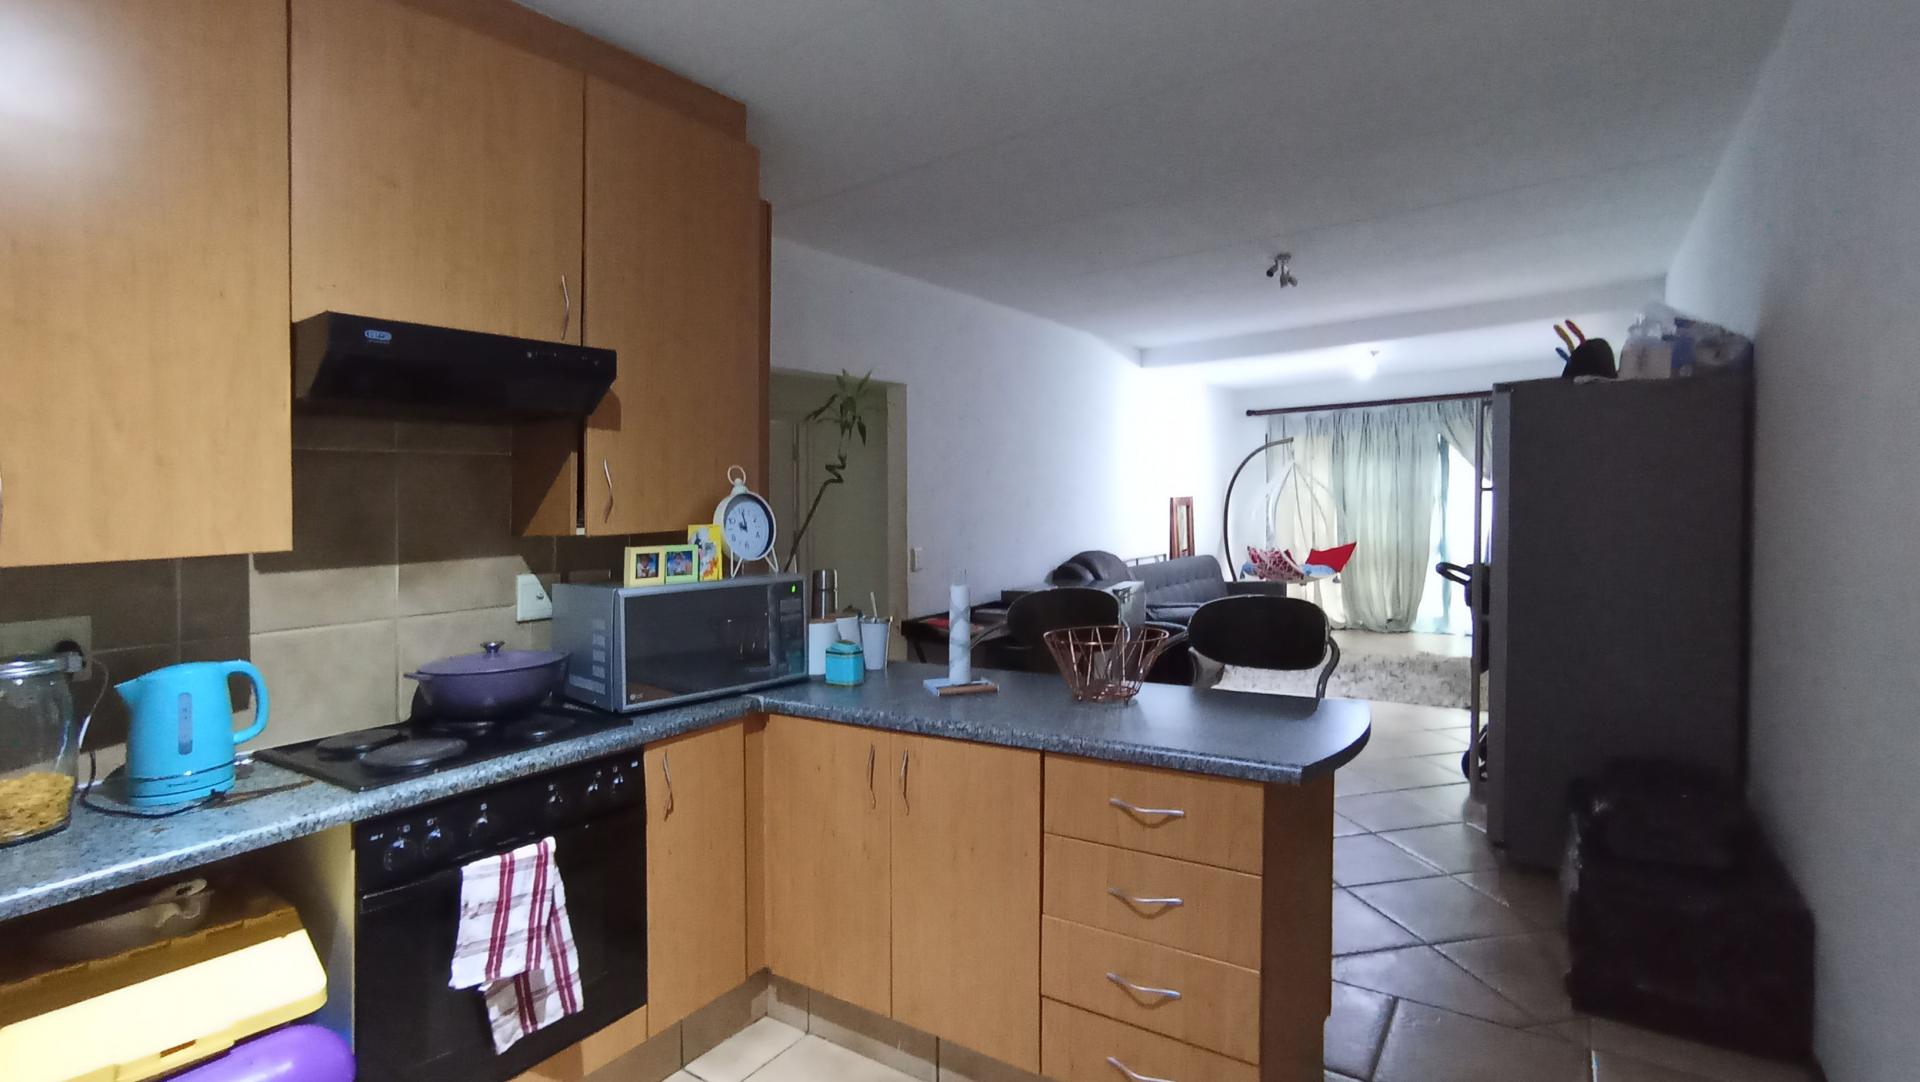 Kitchen - 11 square meters of property in Lone Hill